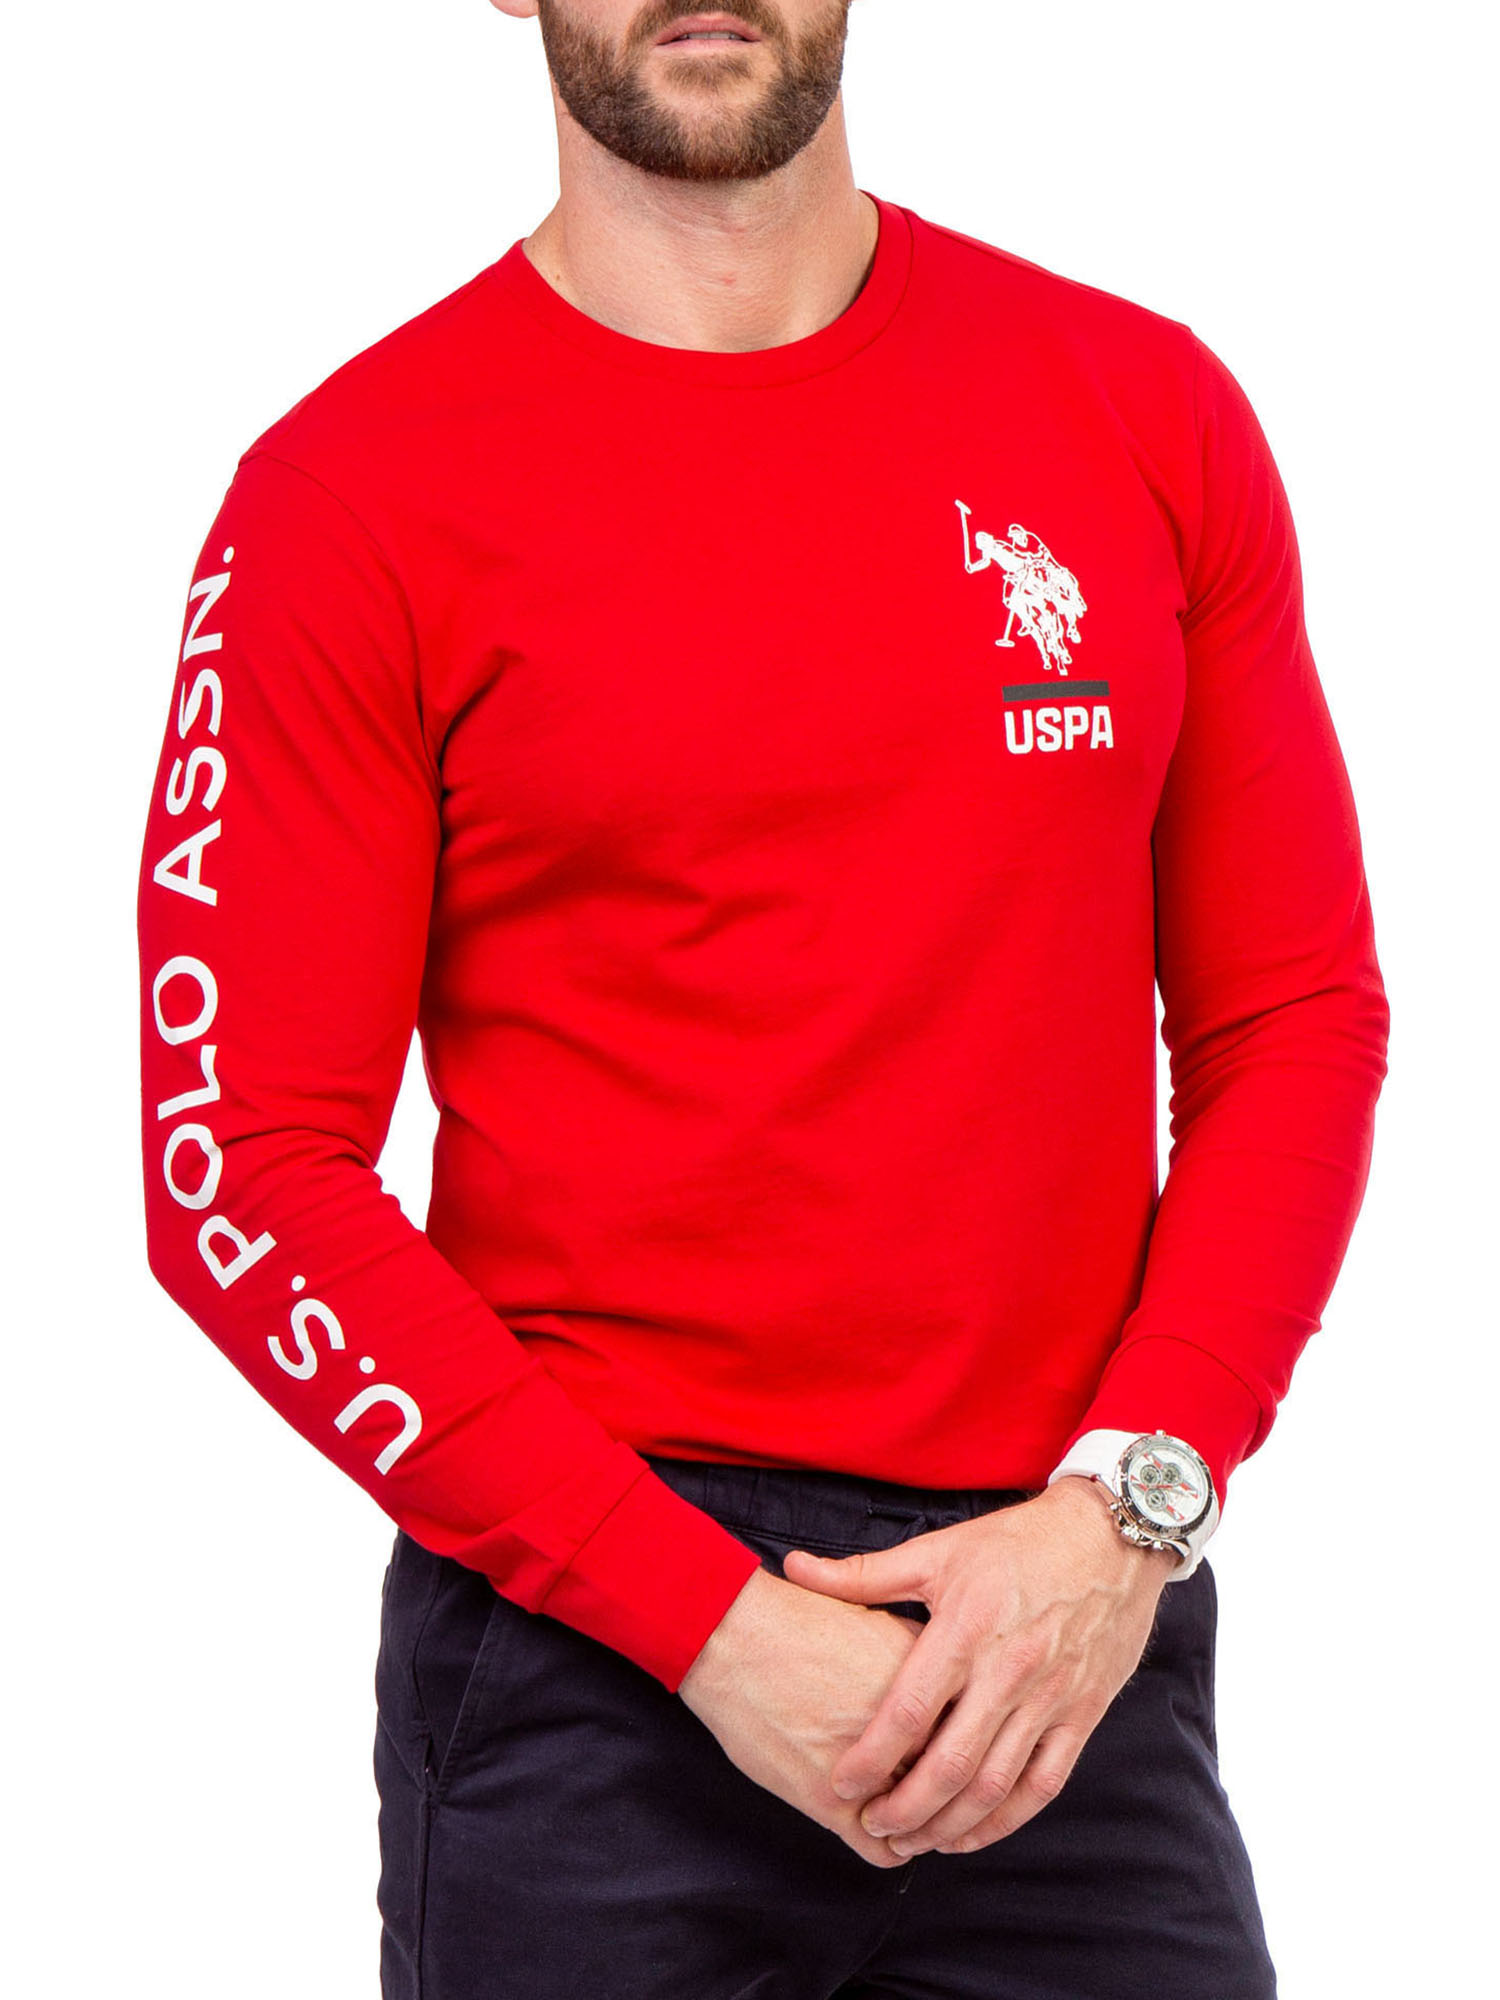 U.S. Polo Assn. Men's and Big Men's Long Sleeve Graphic T-Shirt - image 3 of 7